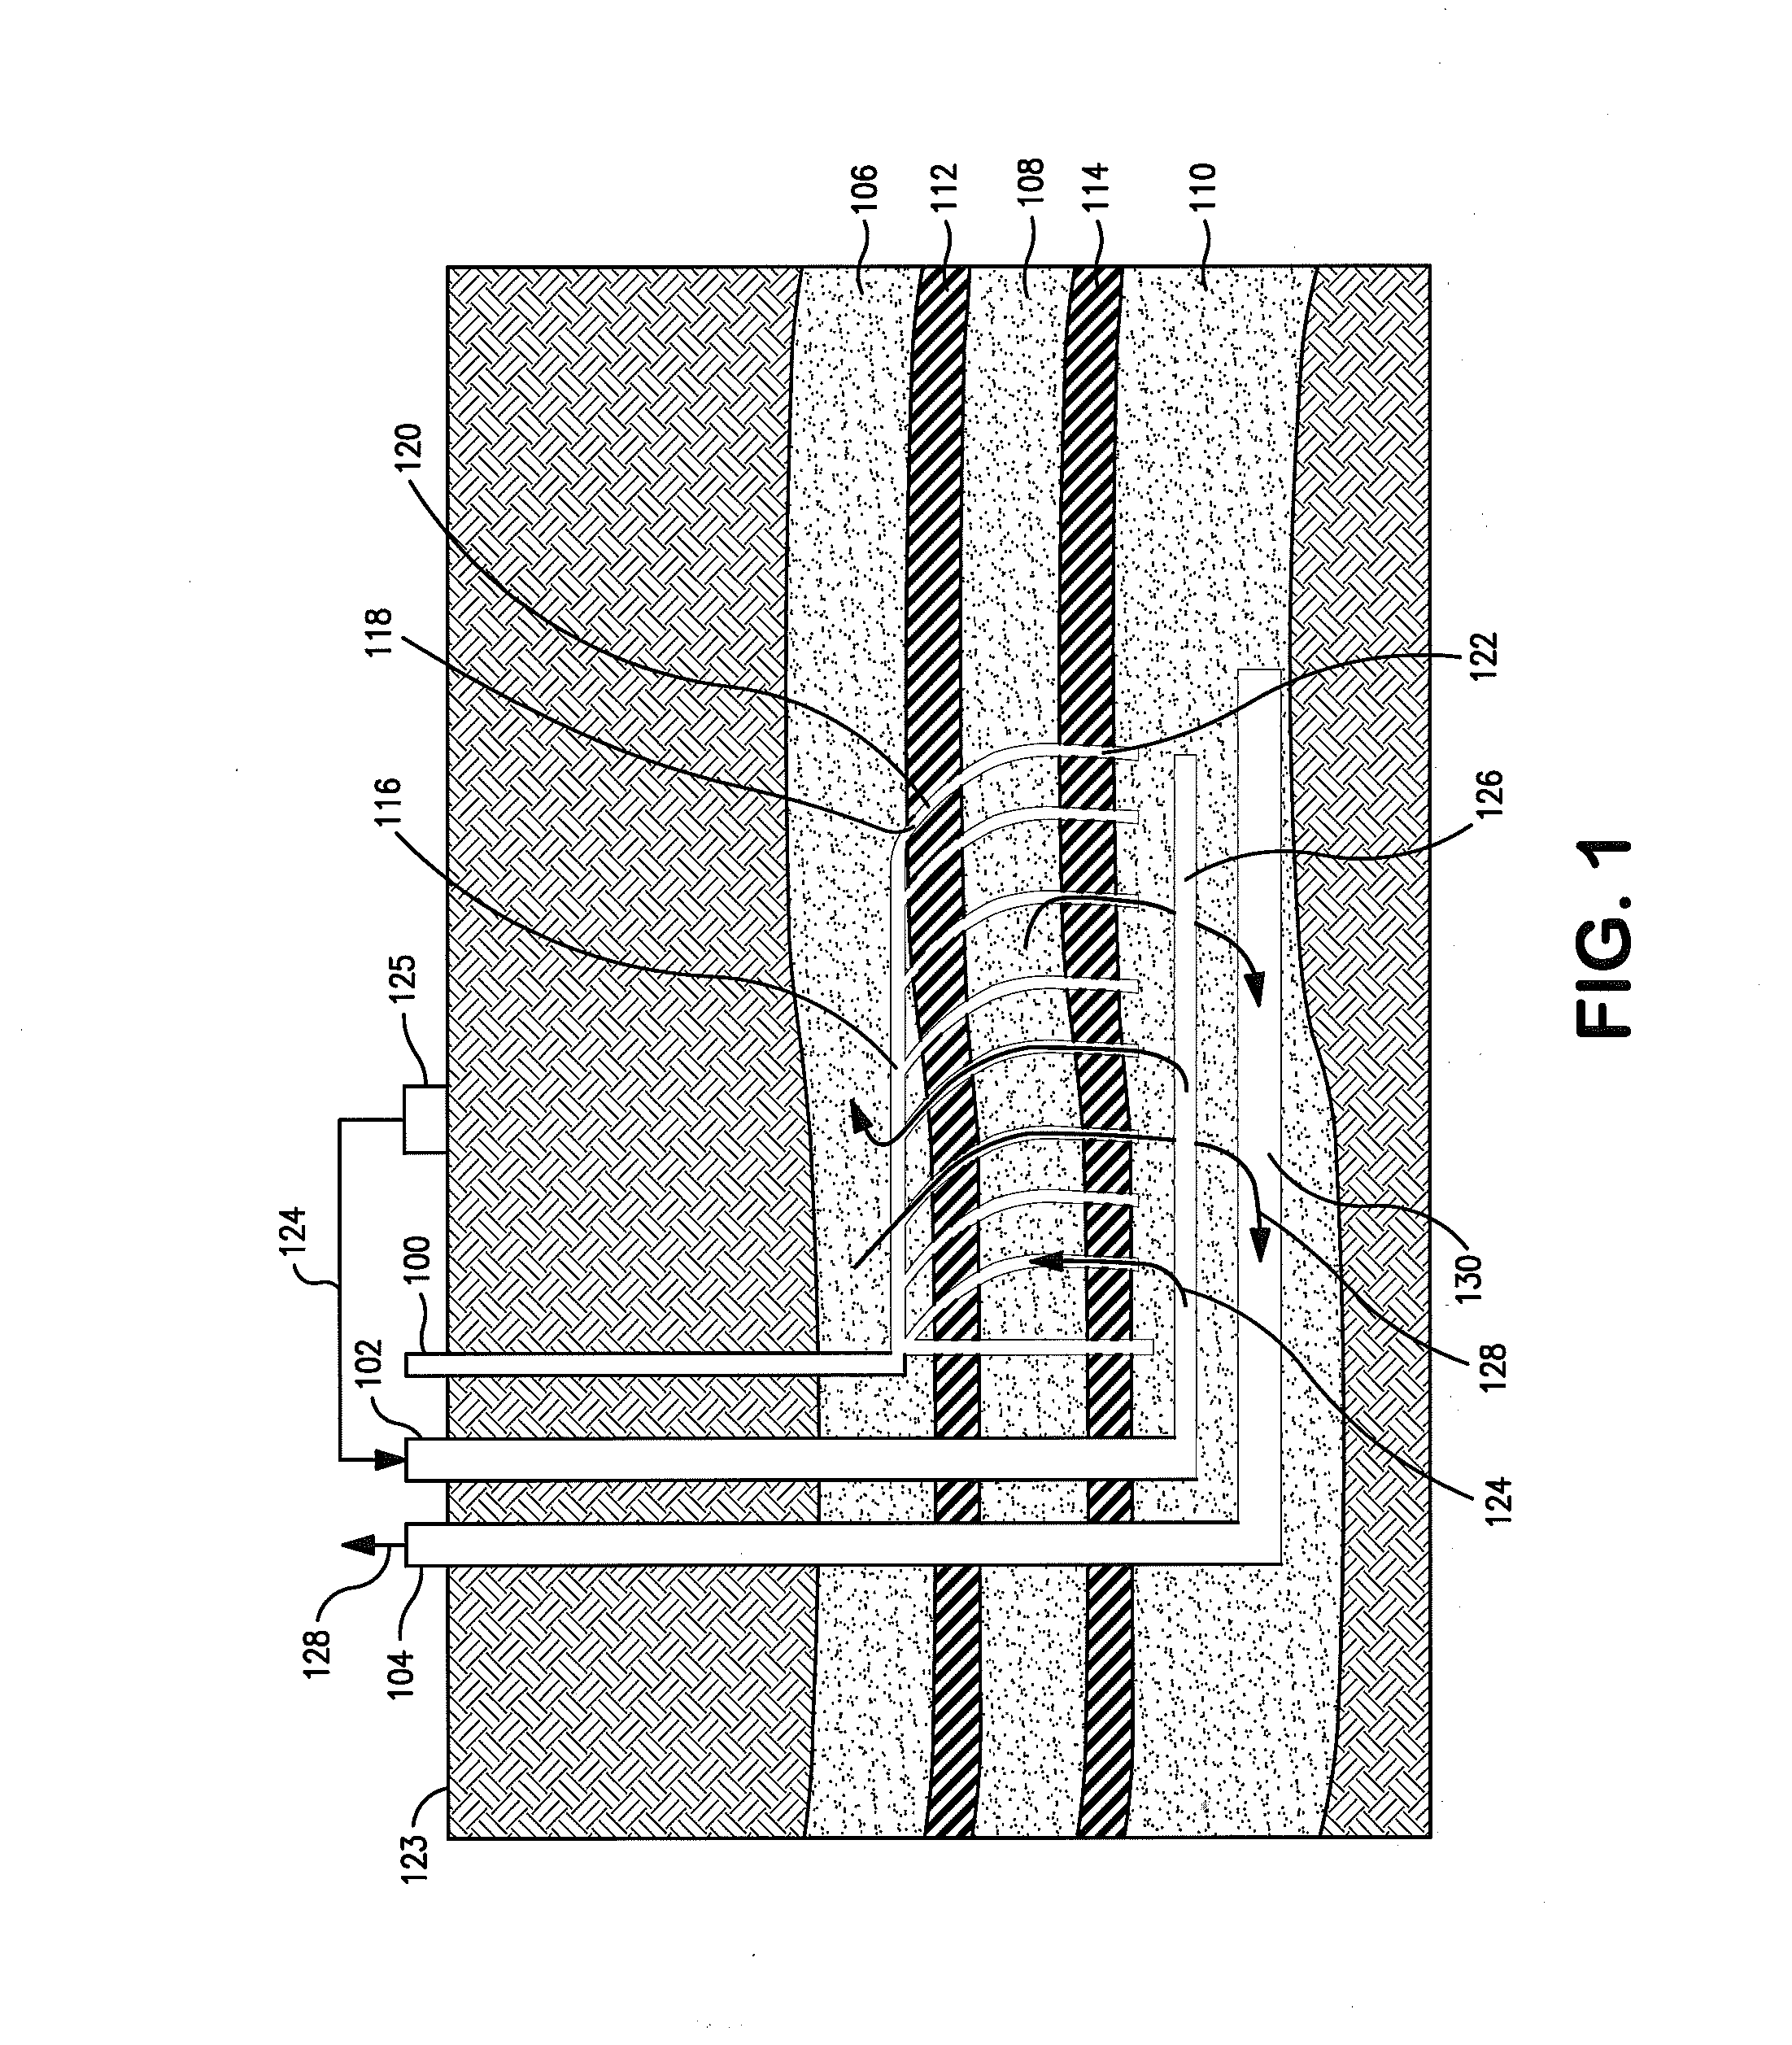 Draining a reservoir with an interbedded layer